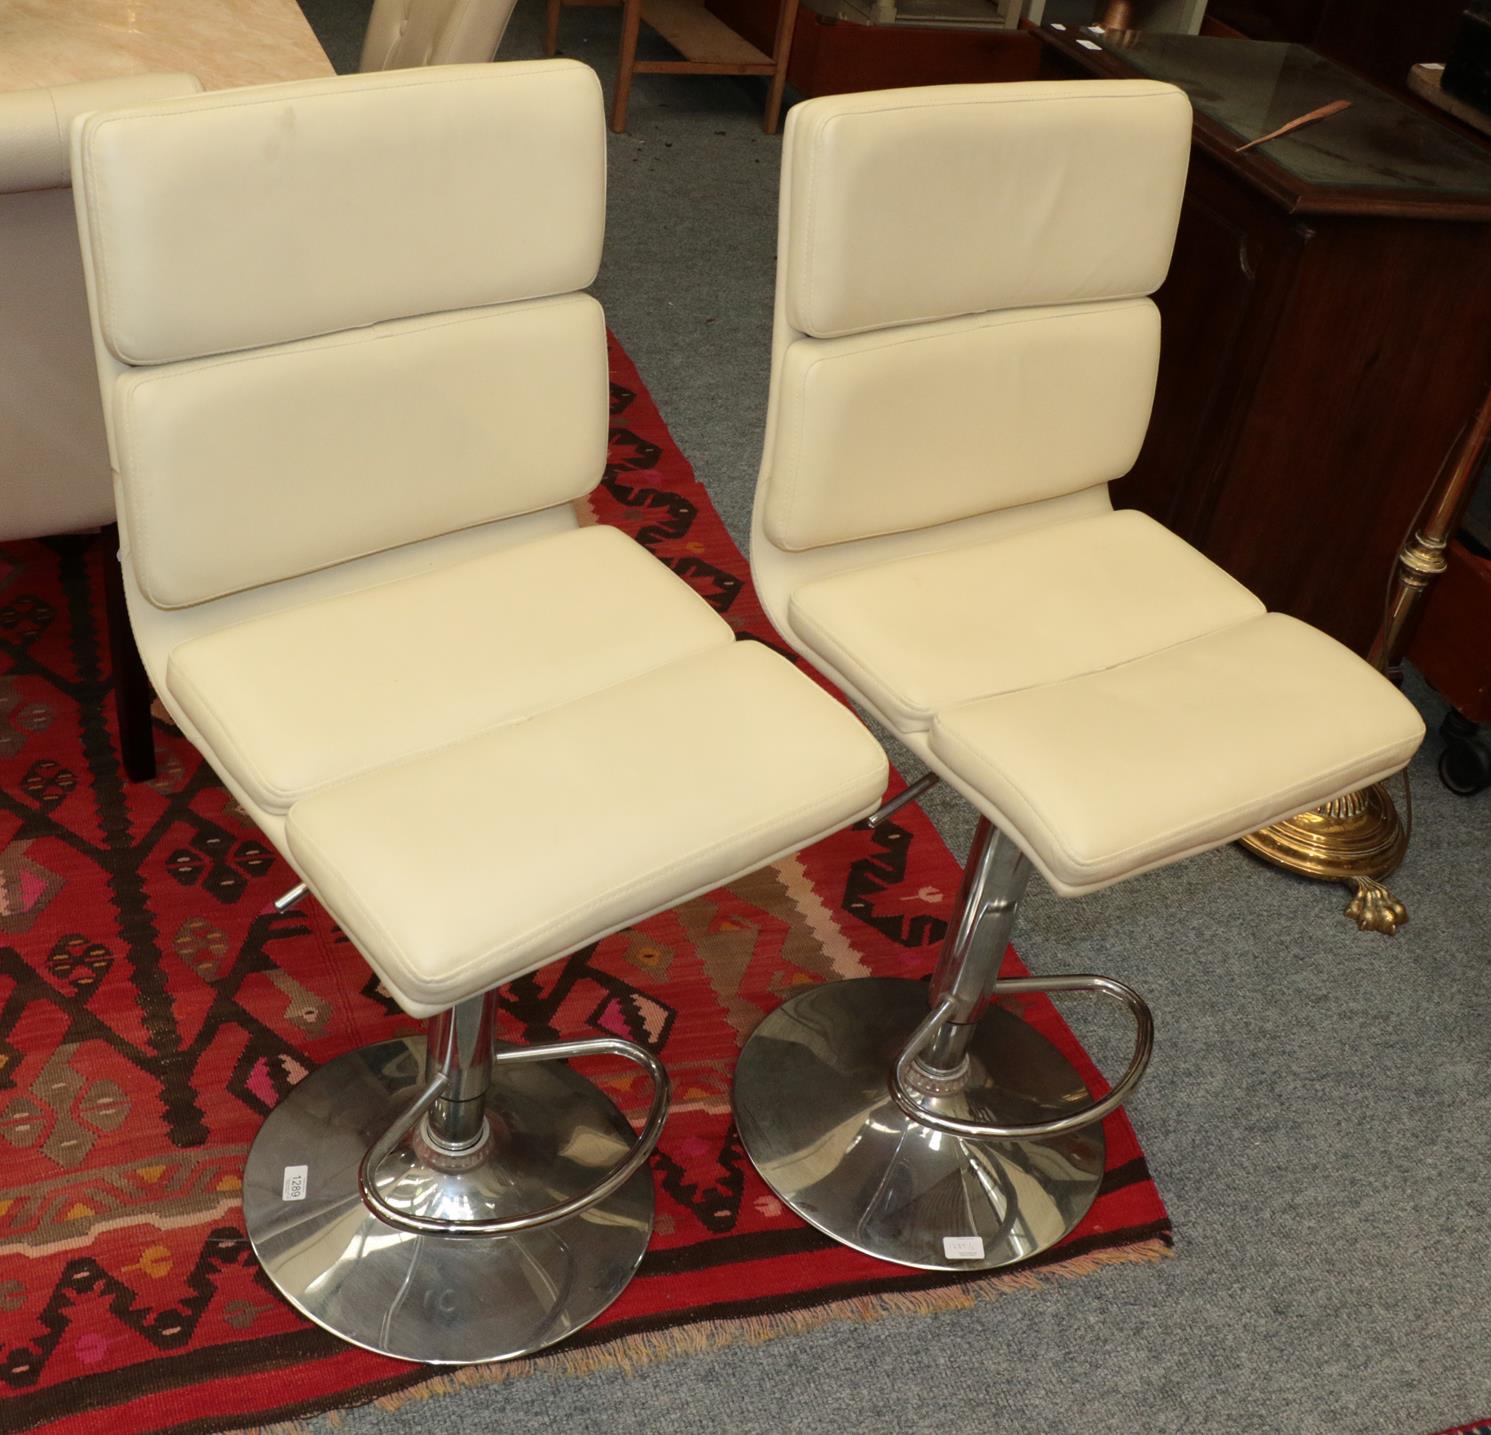 Lot 1289 - A pair of Art Deco style cream leatherette and chrome swivel chairs (2)